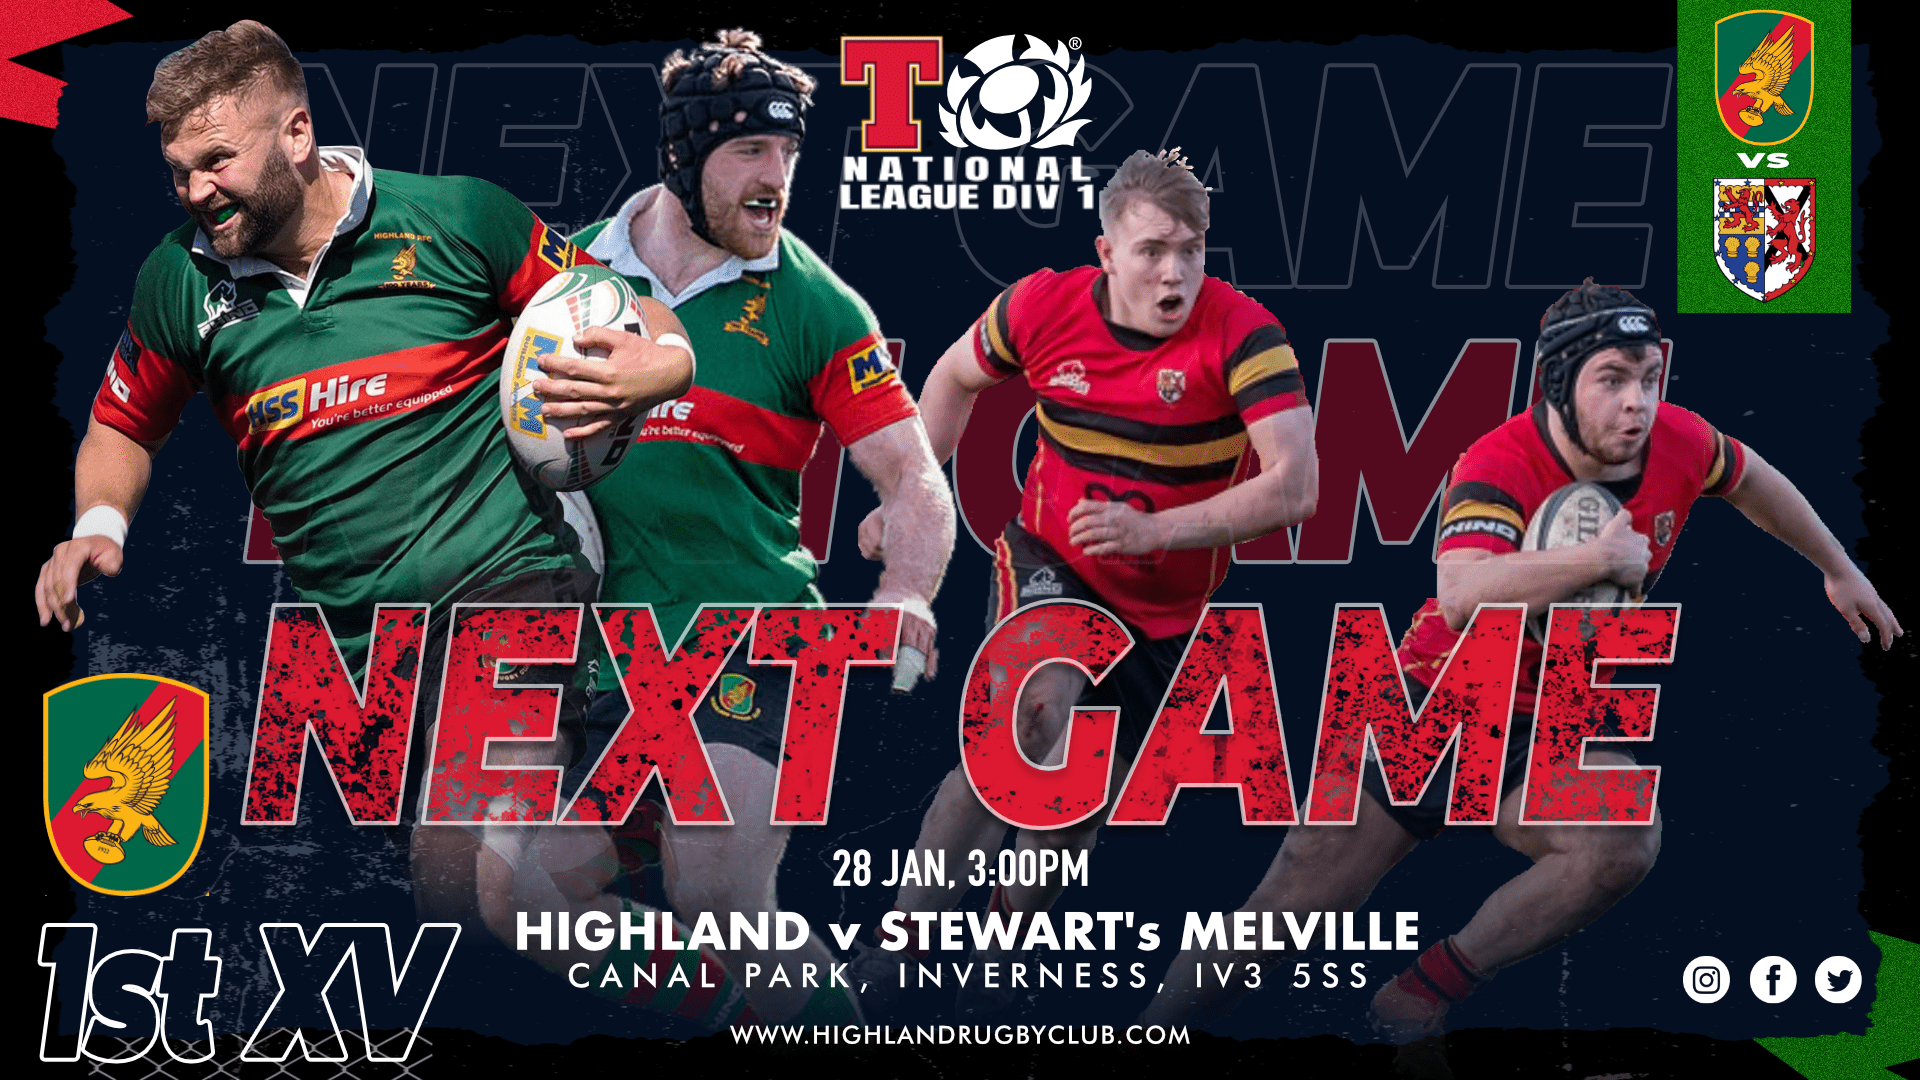 Lets our audience know that Highland RFC 1st XV's next game is on Sat 28th Jan 2023 against Stewarts Melville RFC at Canal Park Inverness. Kick Off is at 3pm.